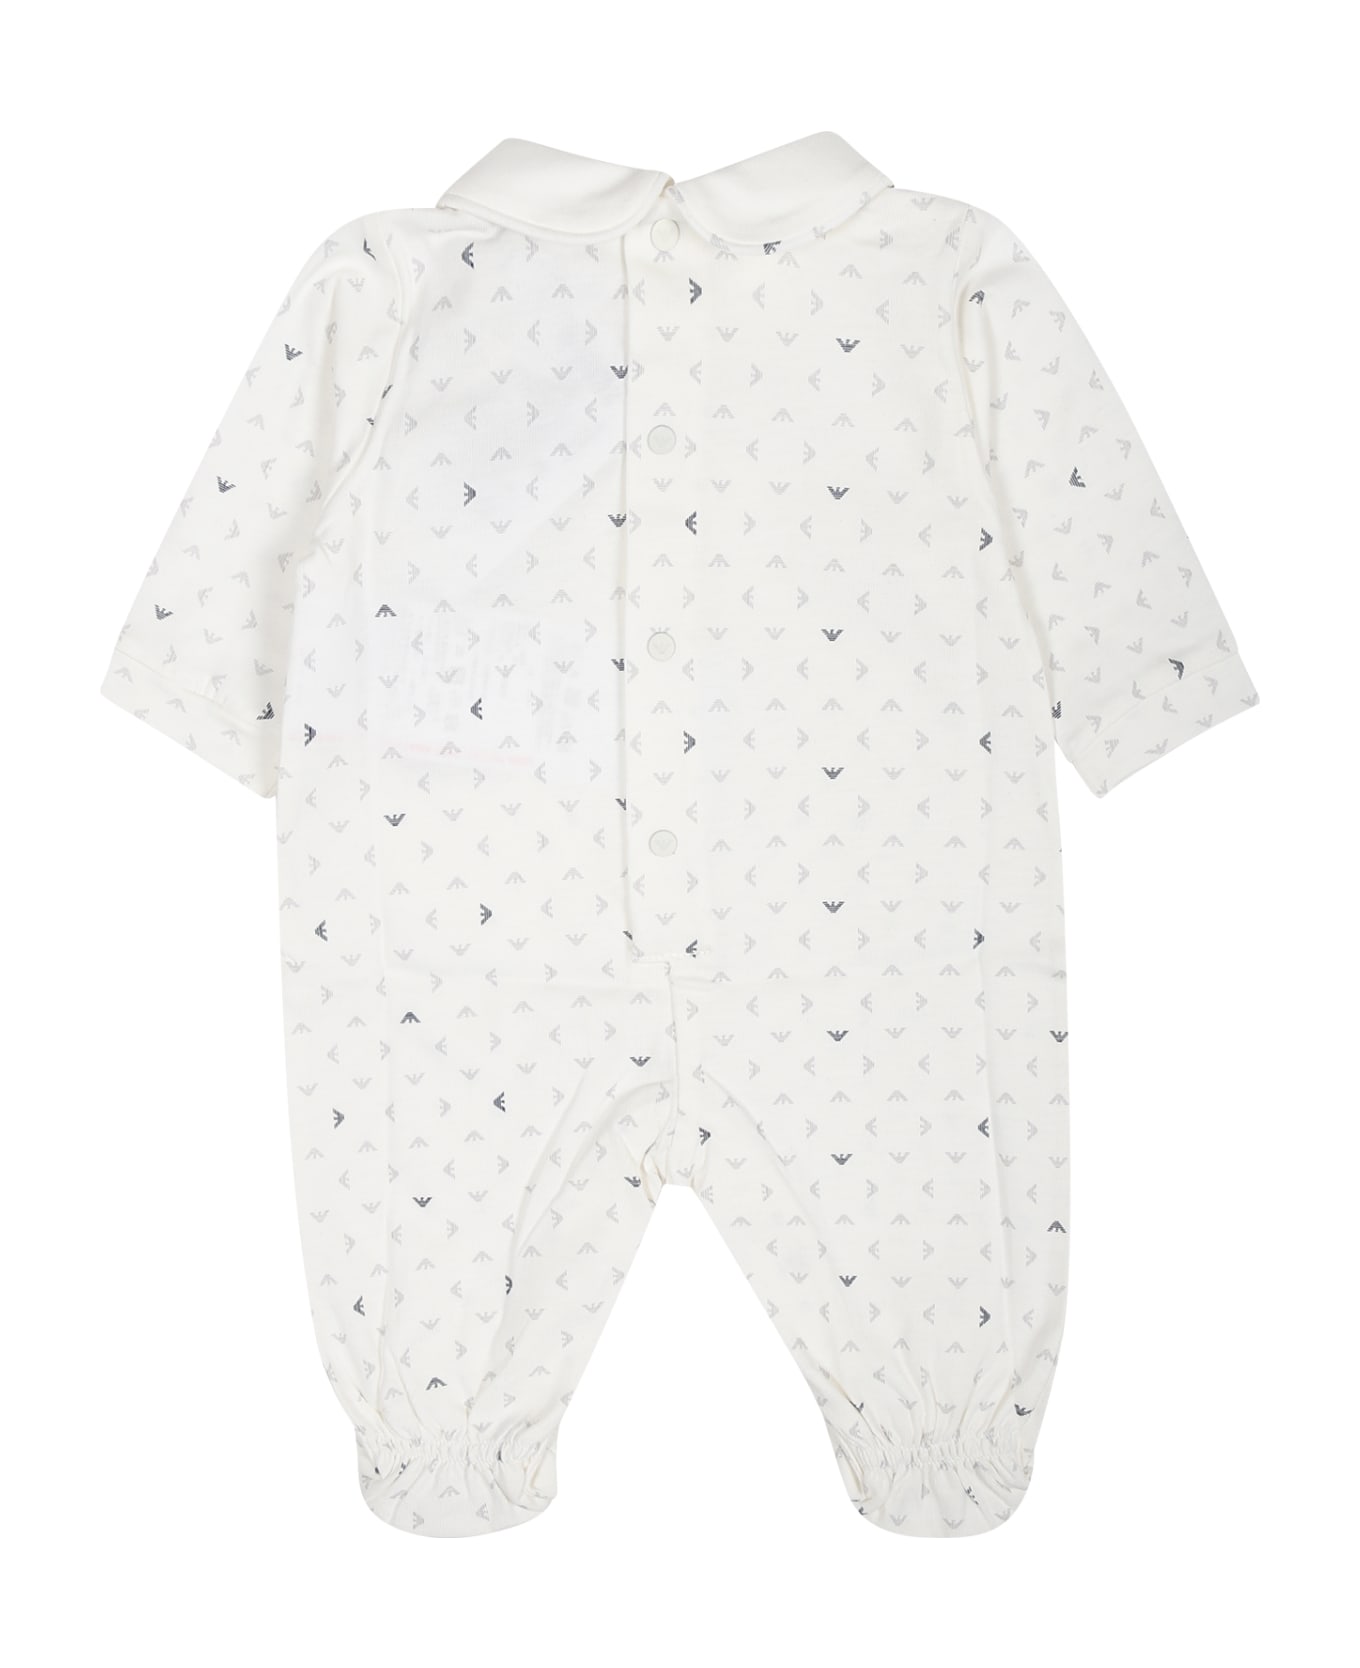 Emporio Armani Ivory Playsuit For Baby Boy With All-over Eagle Logo - Ivory